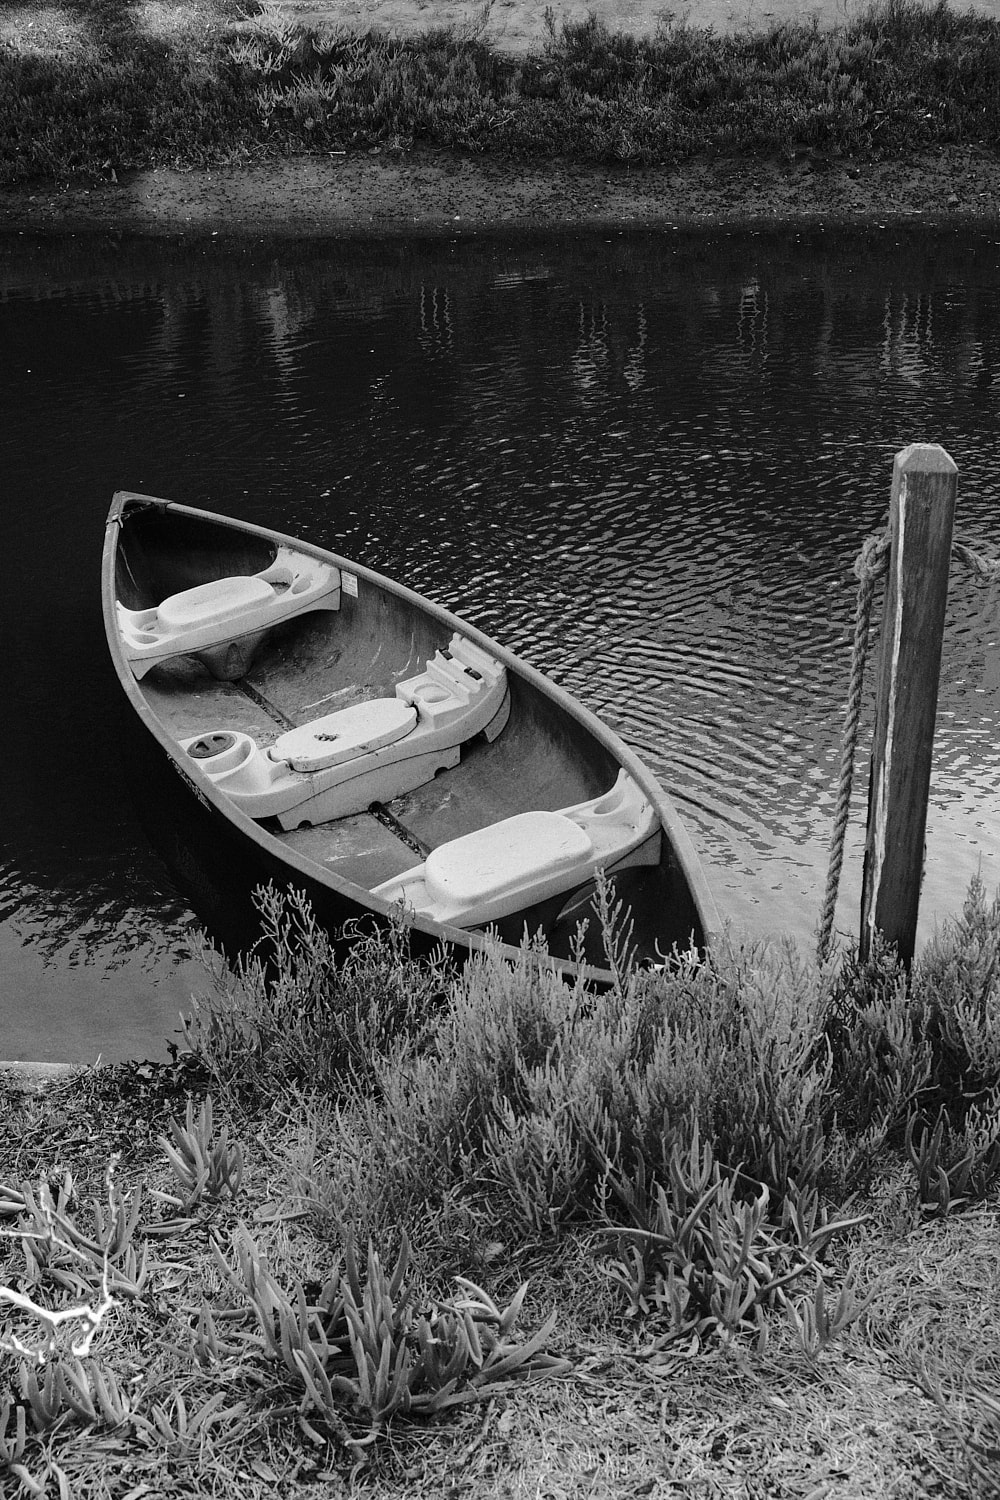 Black and white portrait photo of a canoe tied to a wooden post in the Venice canals.